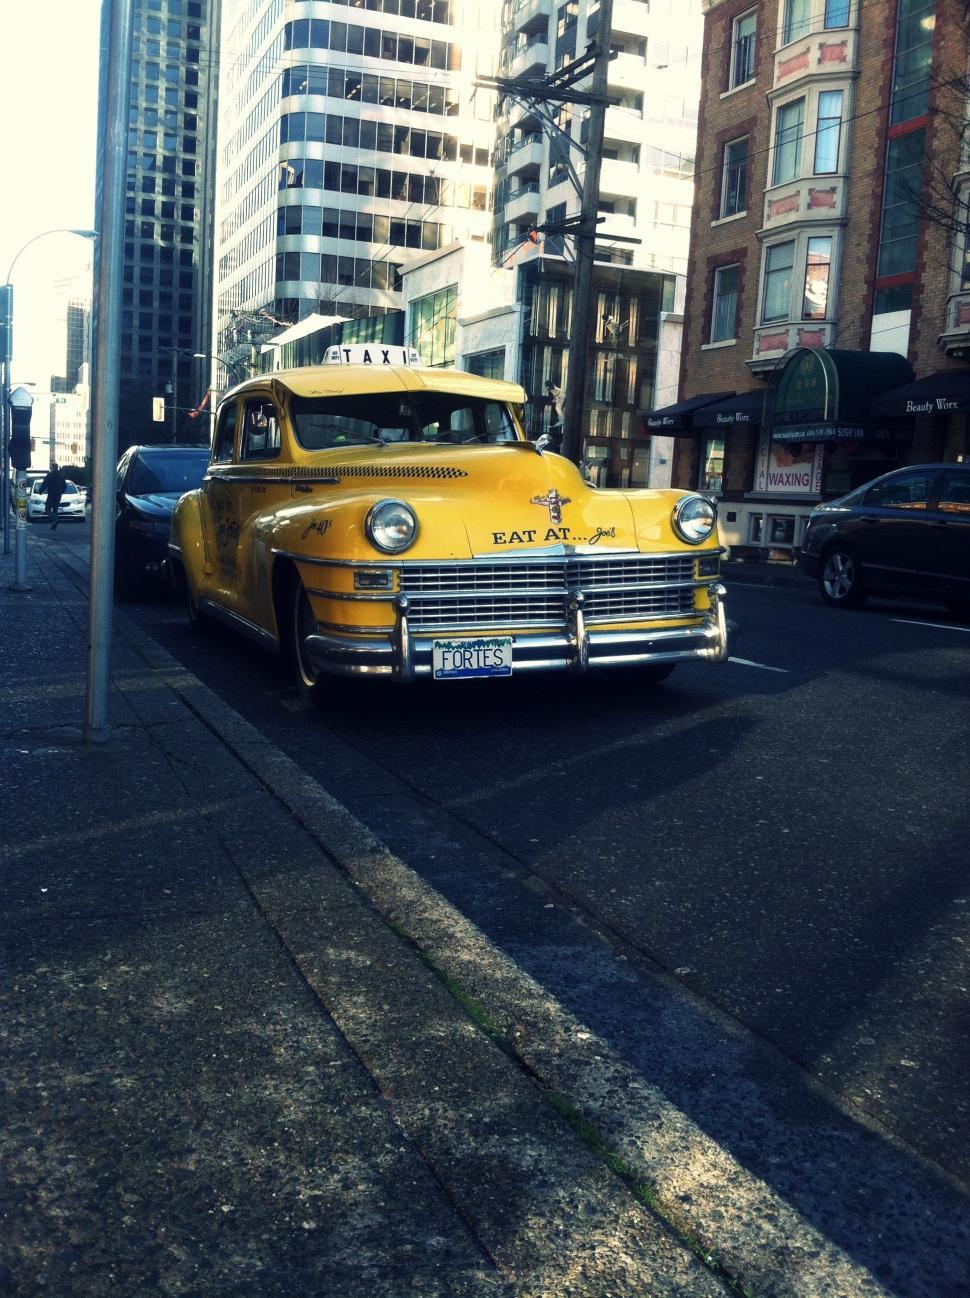 Free Image of Vintage Yellow Taxi Cab and City Buildings  